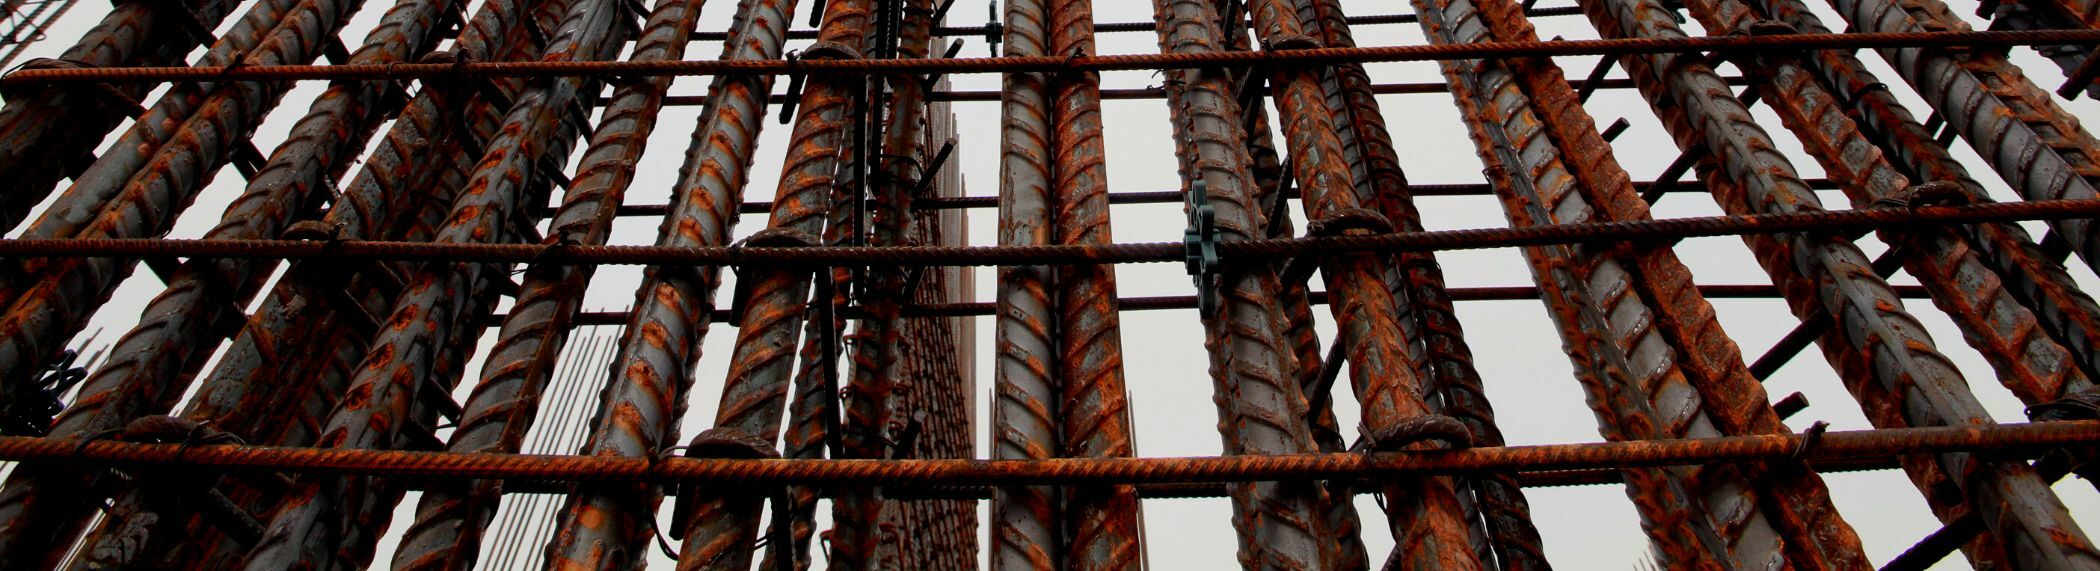 Rebar on a construction site